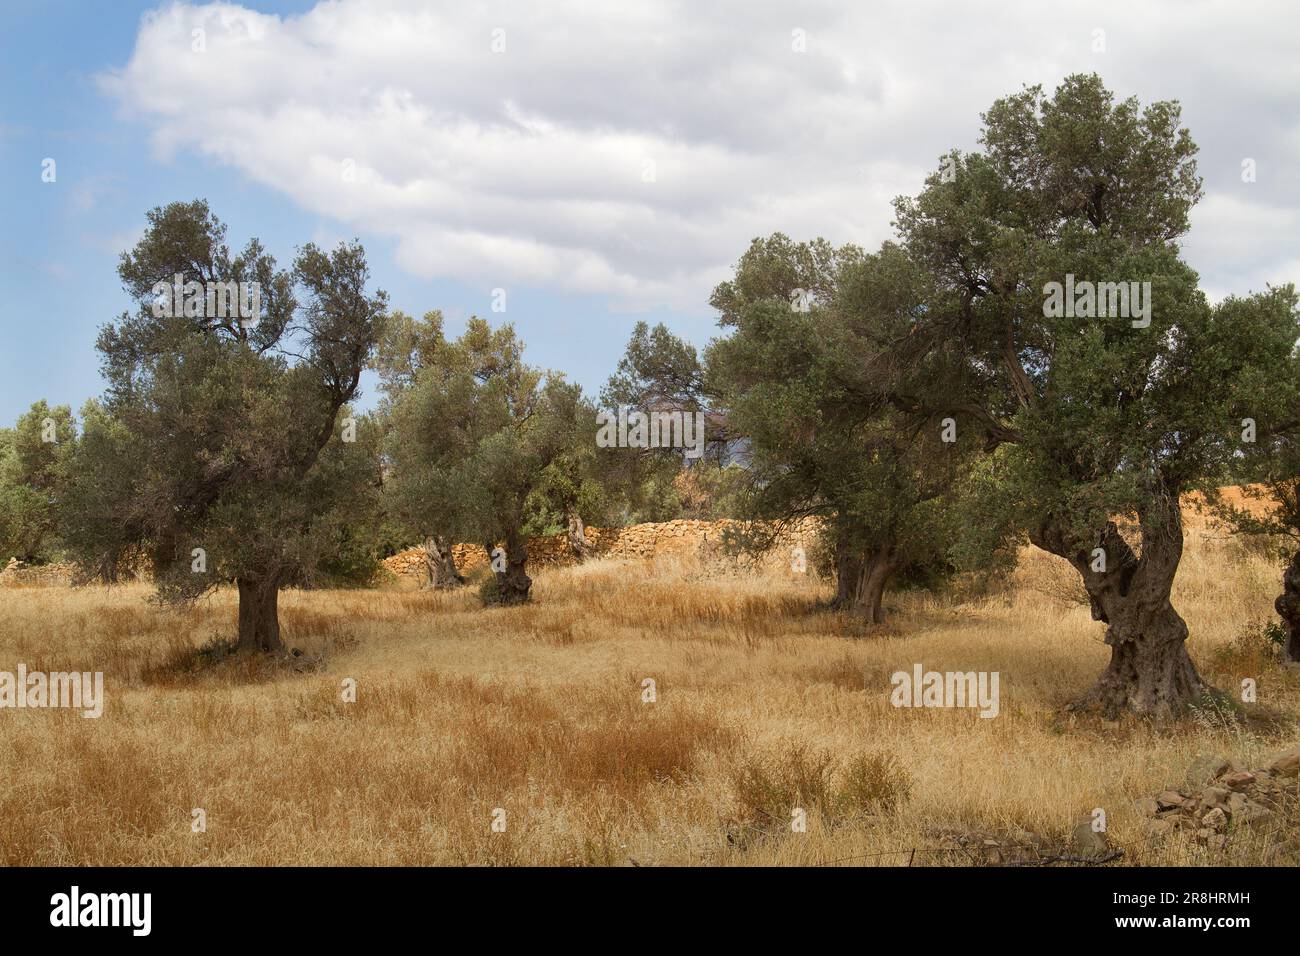 Olive orchard on Crete, Greece, with undergrowth of dry, brown grass under blue sky with clouds Stock Photo